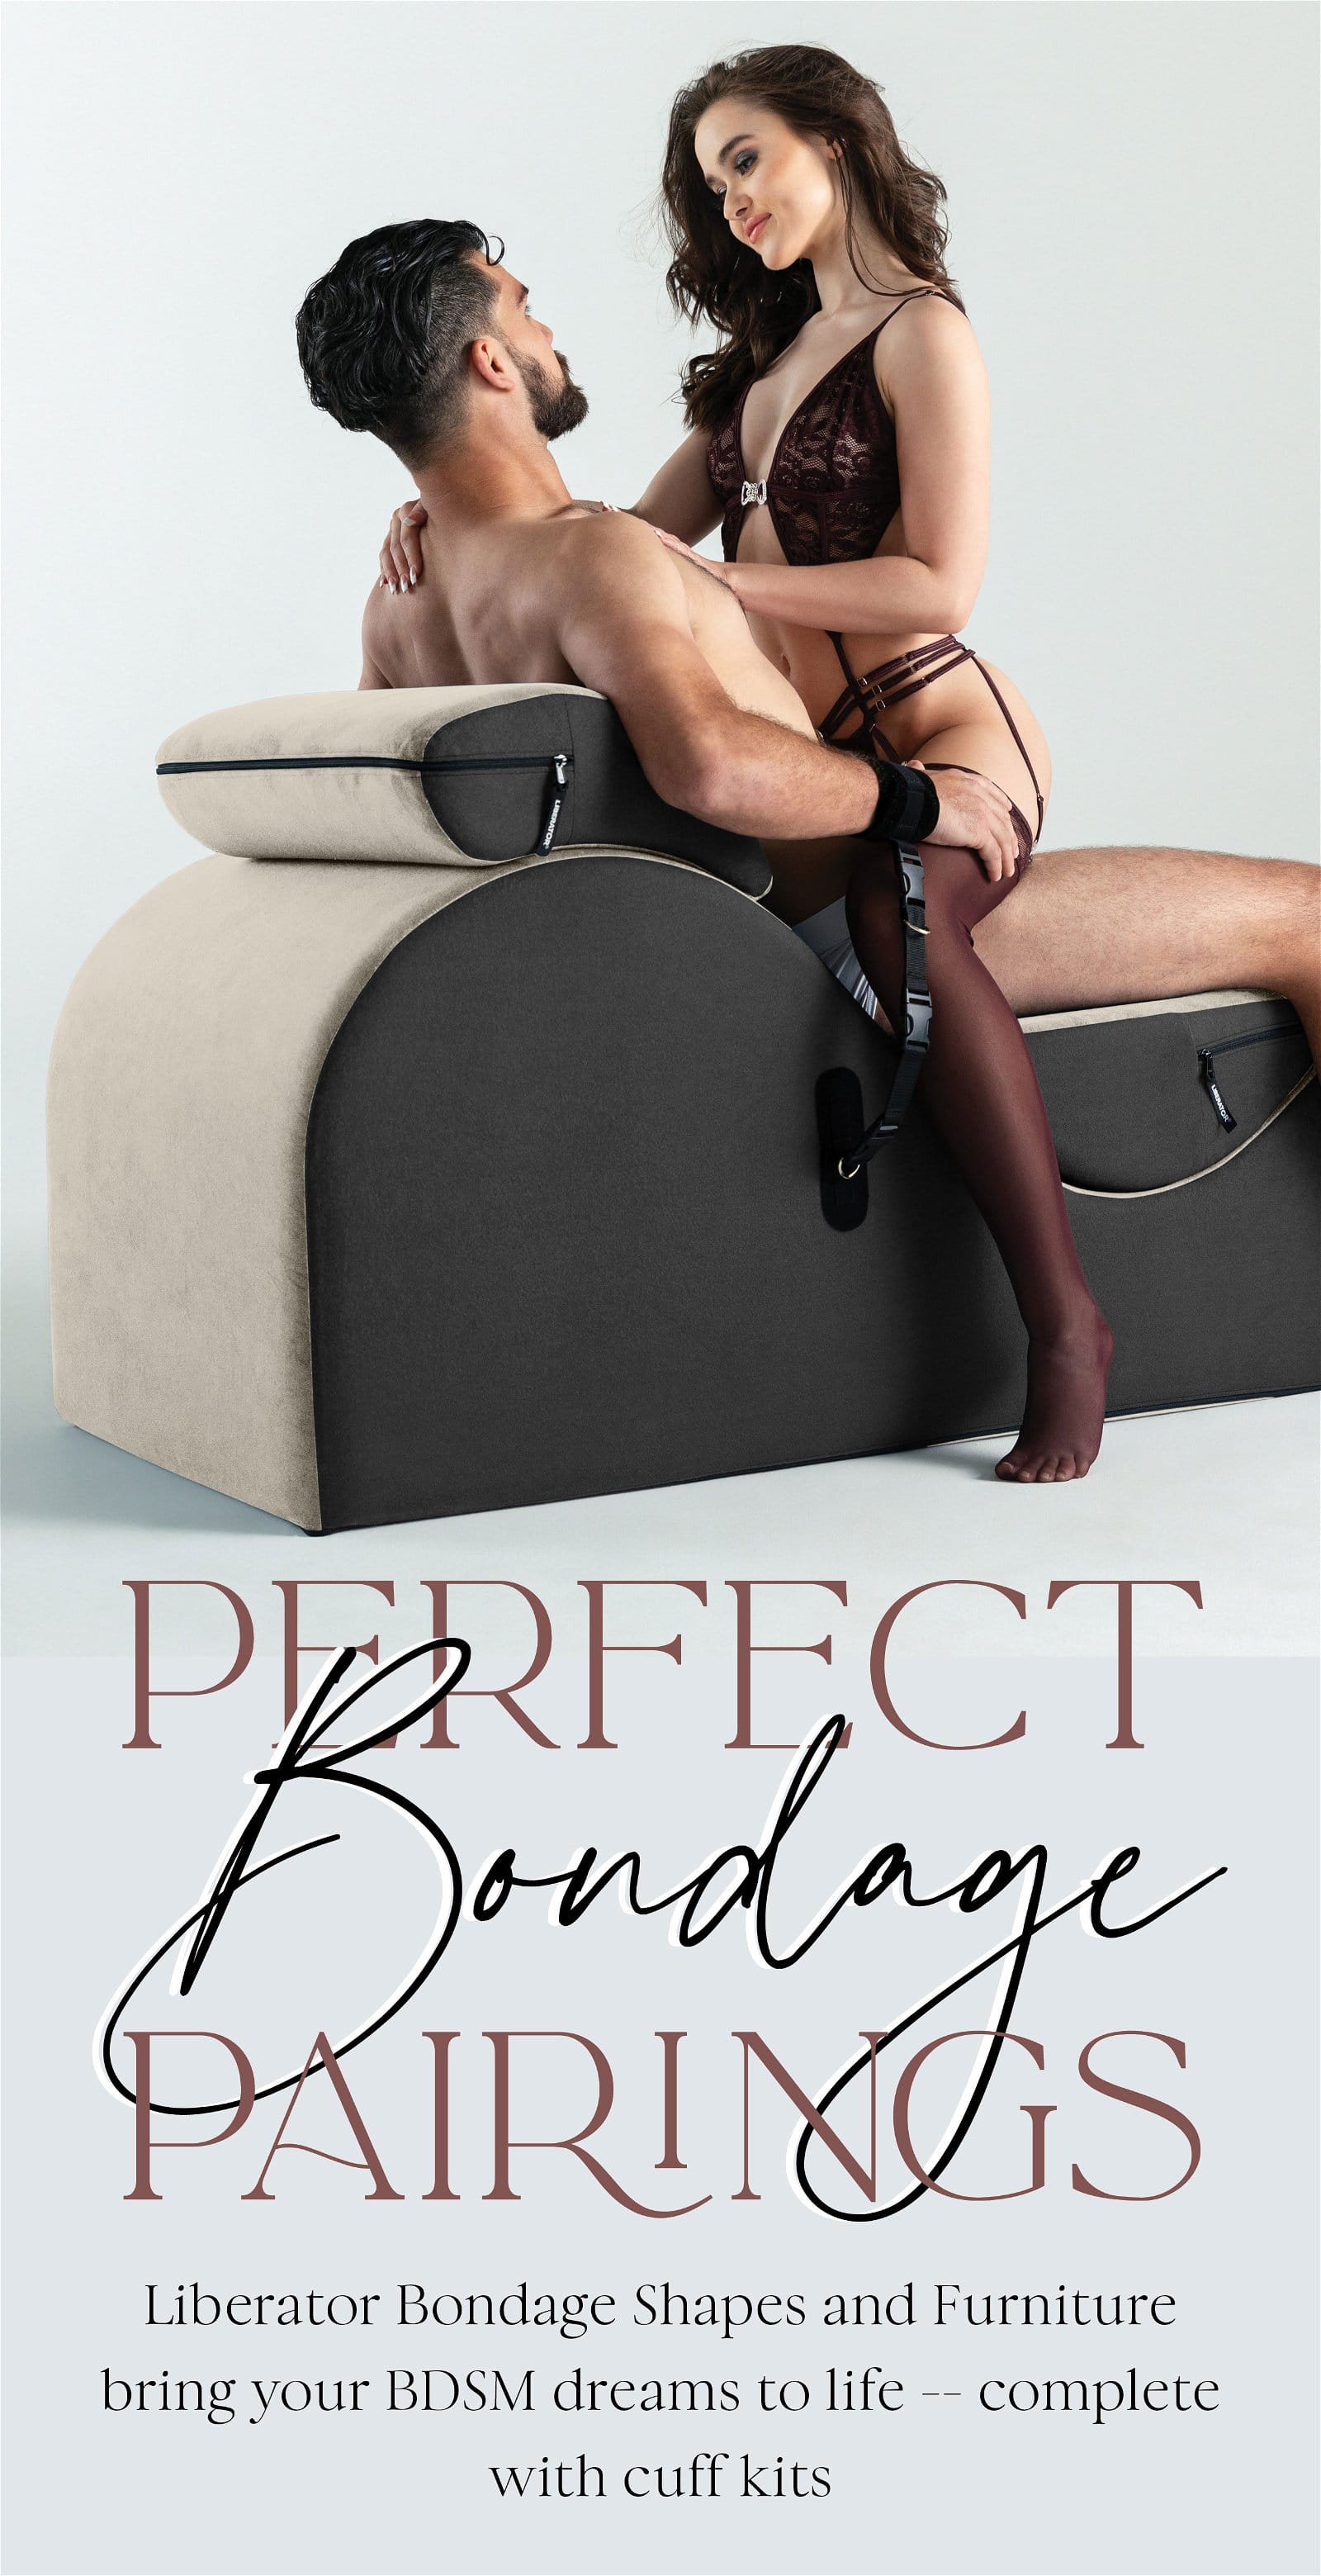 Perfect BONDAGE Pairings Liberator puts a lot of thought into our bondage Shapes, furniture and accessories – with compatible cuffs, kits and covers. They pair up perfectly, so nothing holds you back from your kinkiest fantasies.